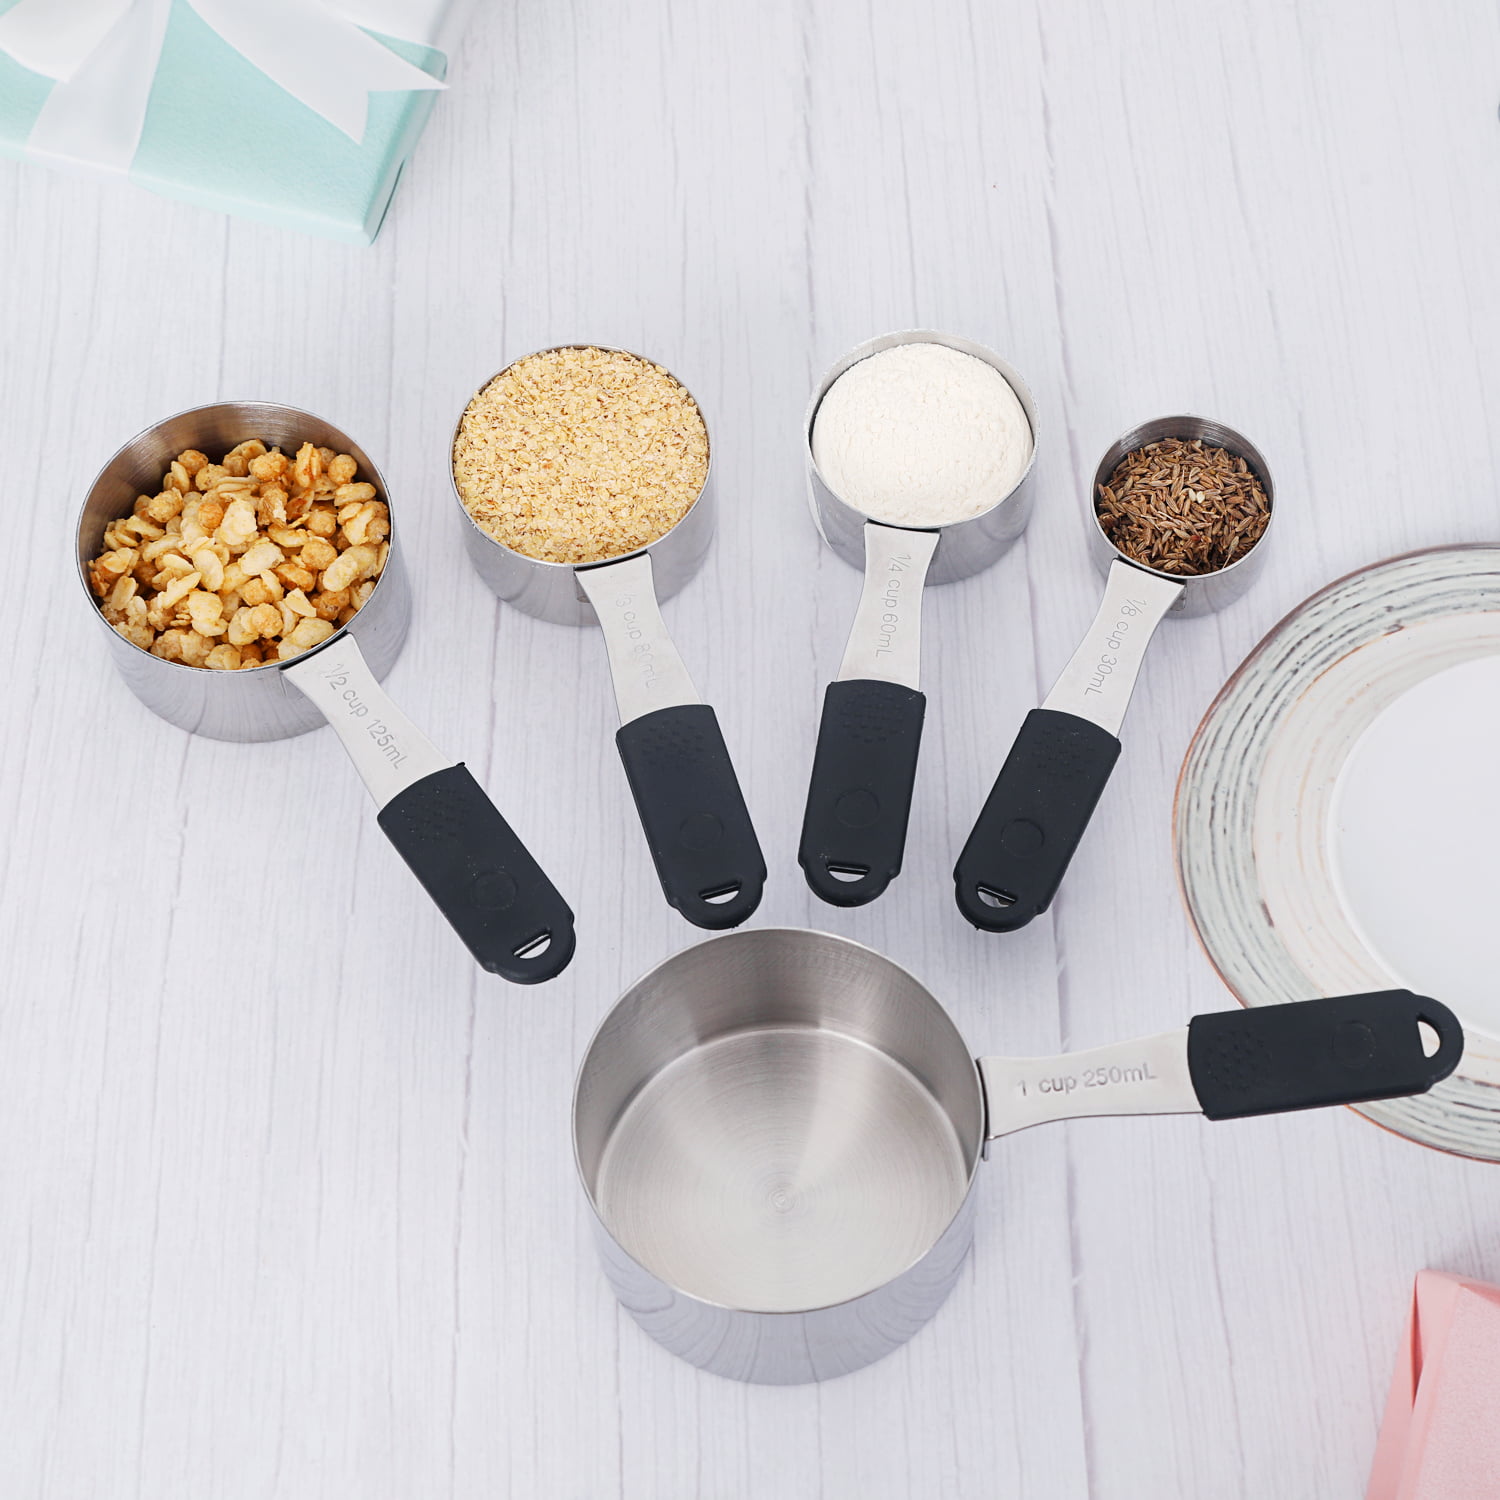 EDELIN Measuring Cups and Magnetic Measuring Spoons Set, Stainless